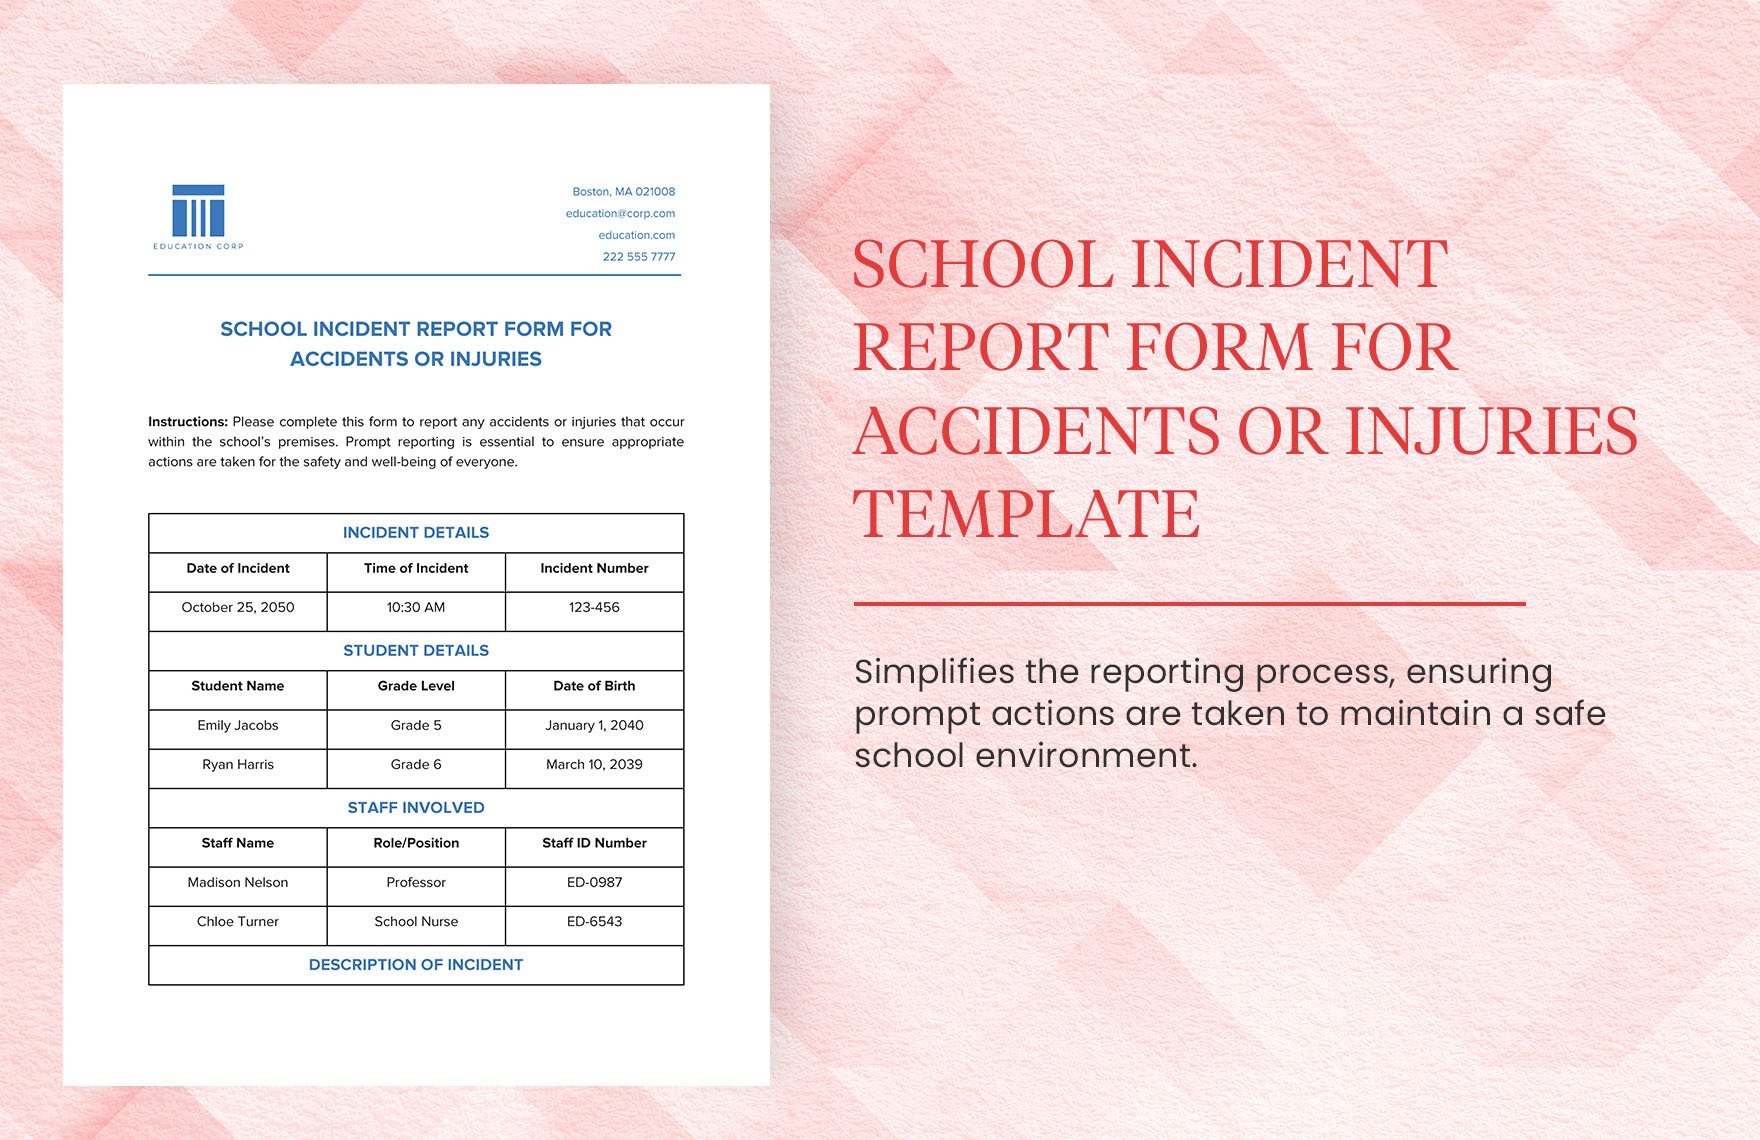 School Incident Report Form for Accidents or Injuries Template